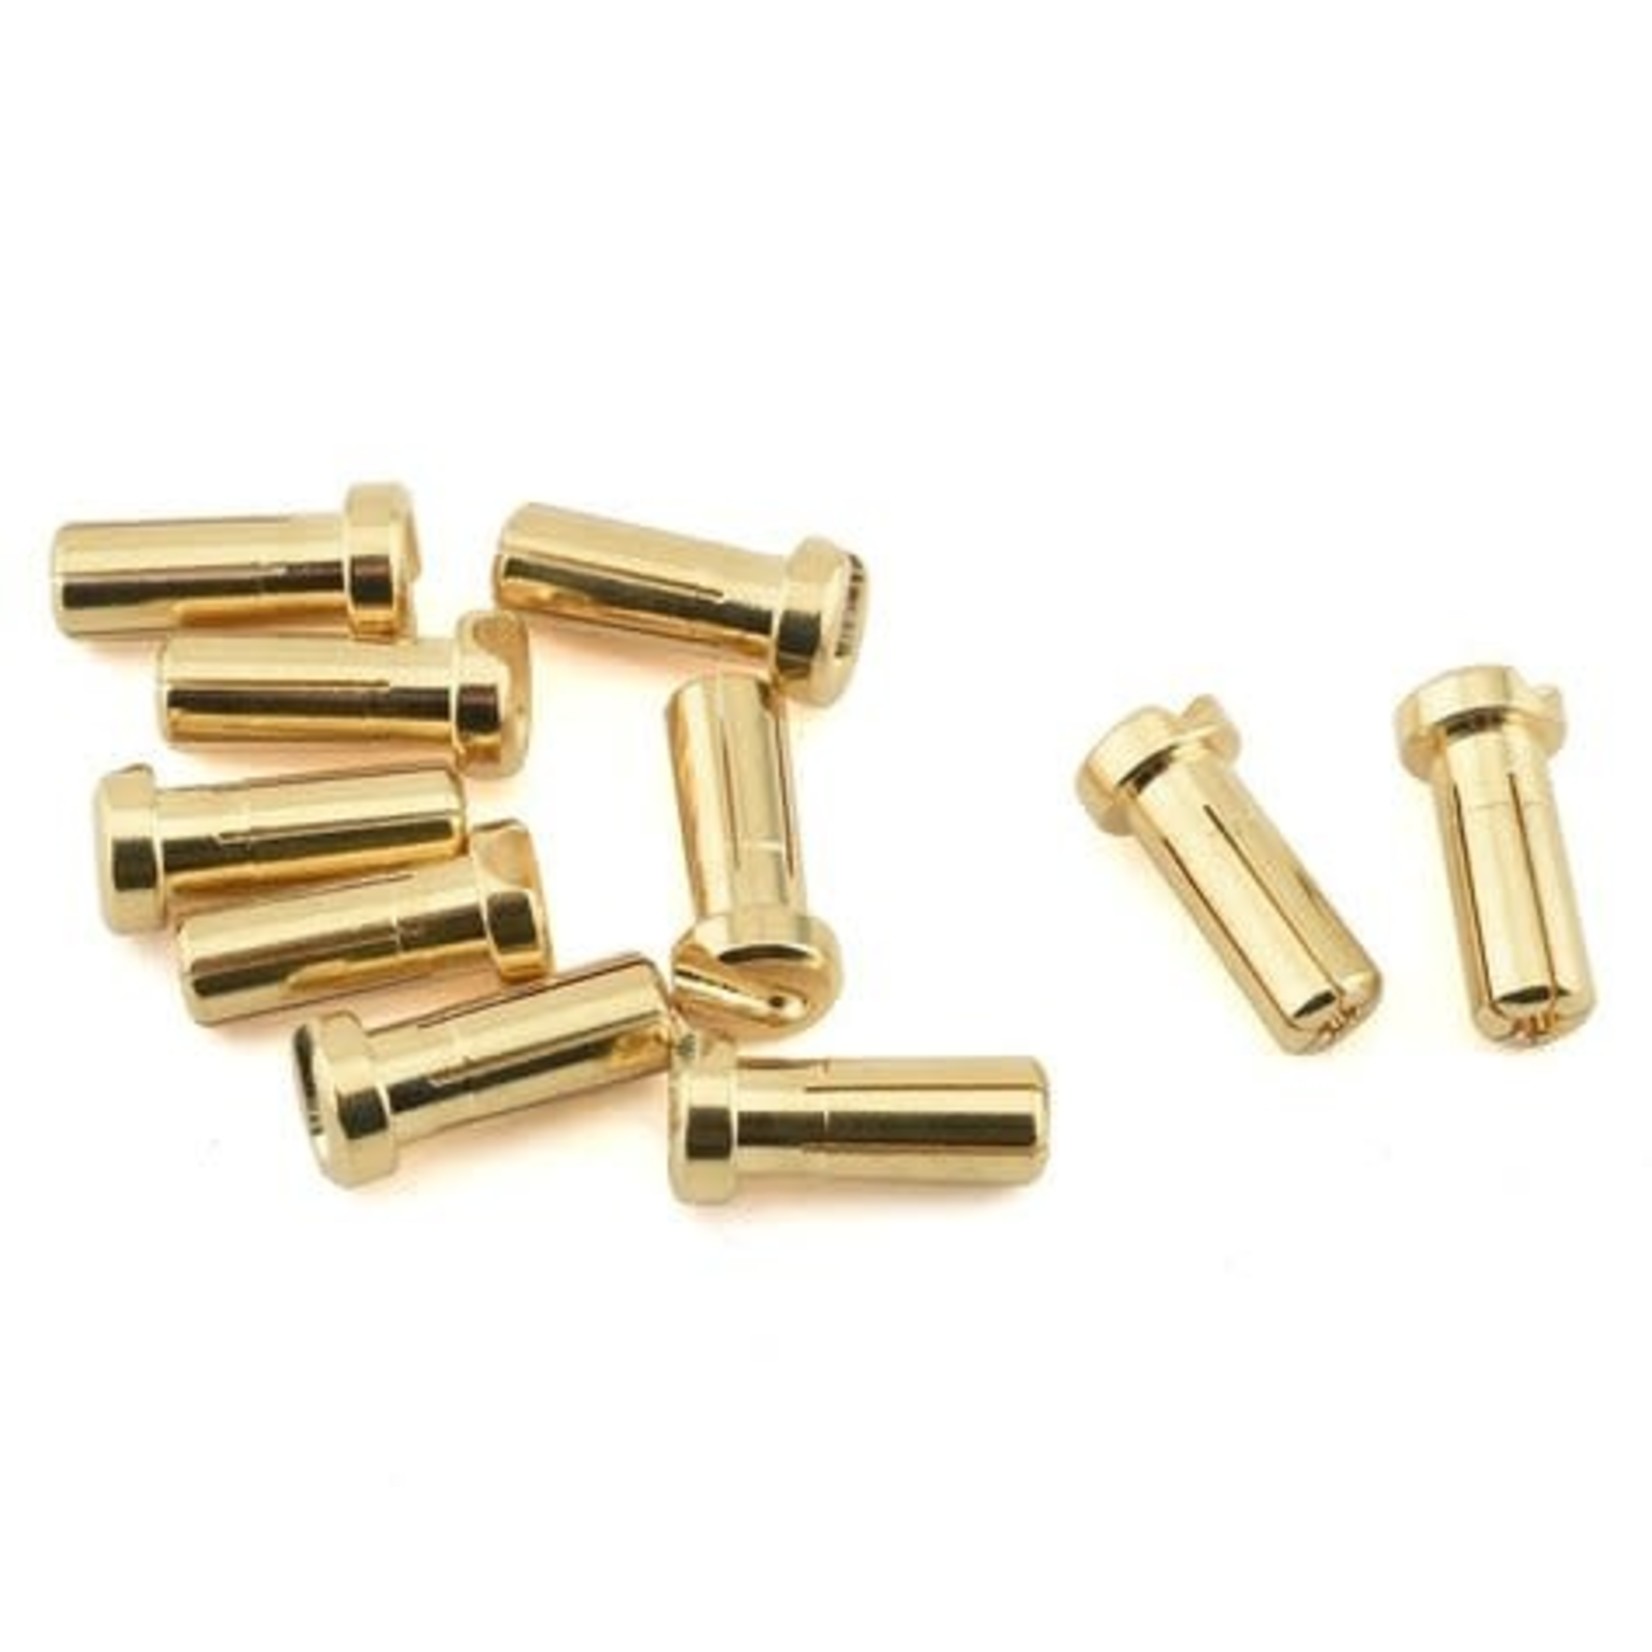 1UP 1UP Racing 5mm LowPro Bullet Plugs (10)